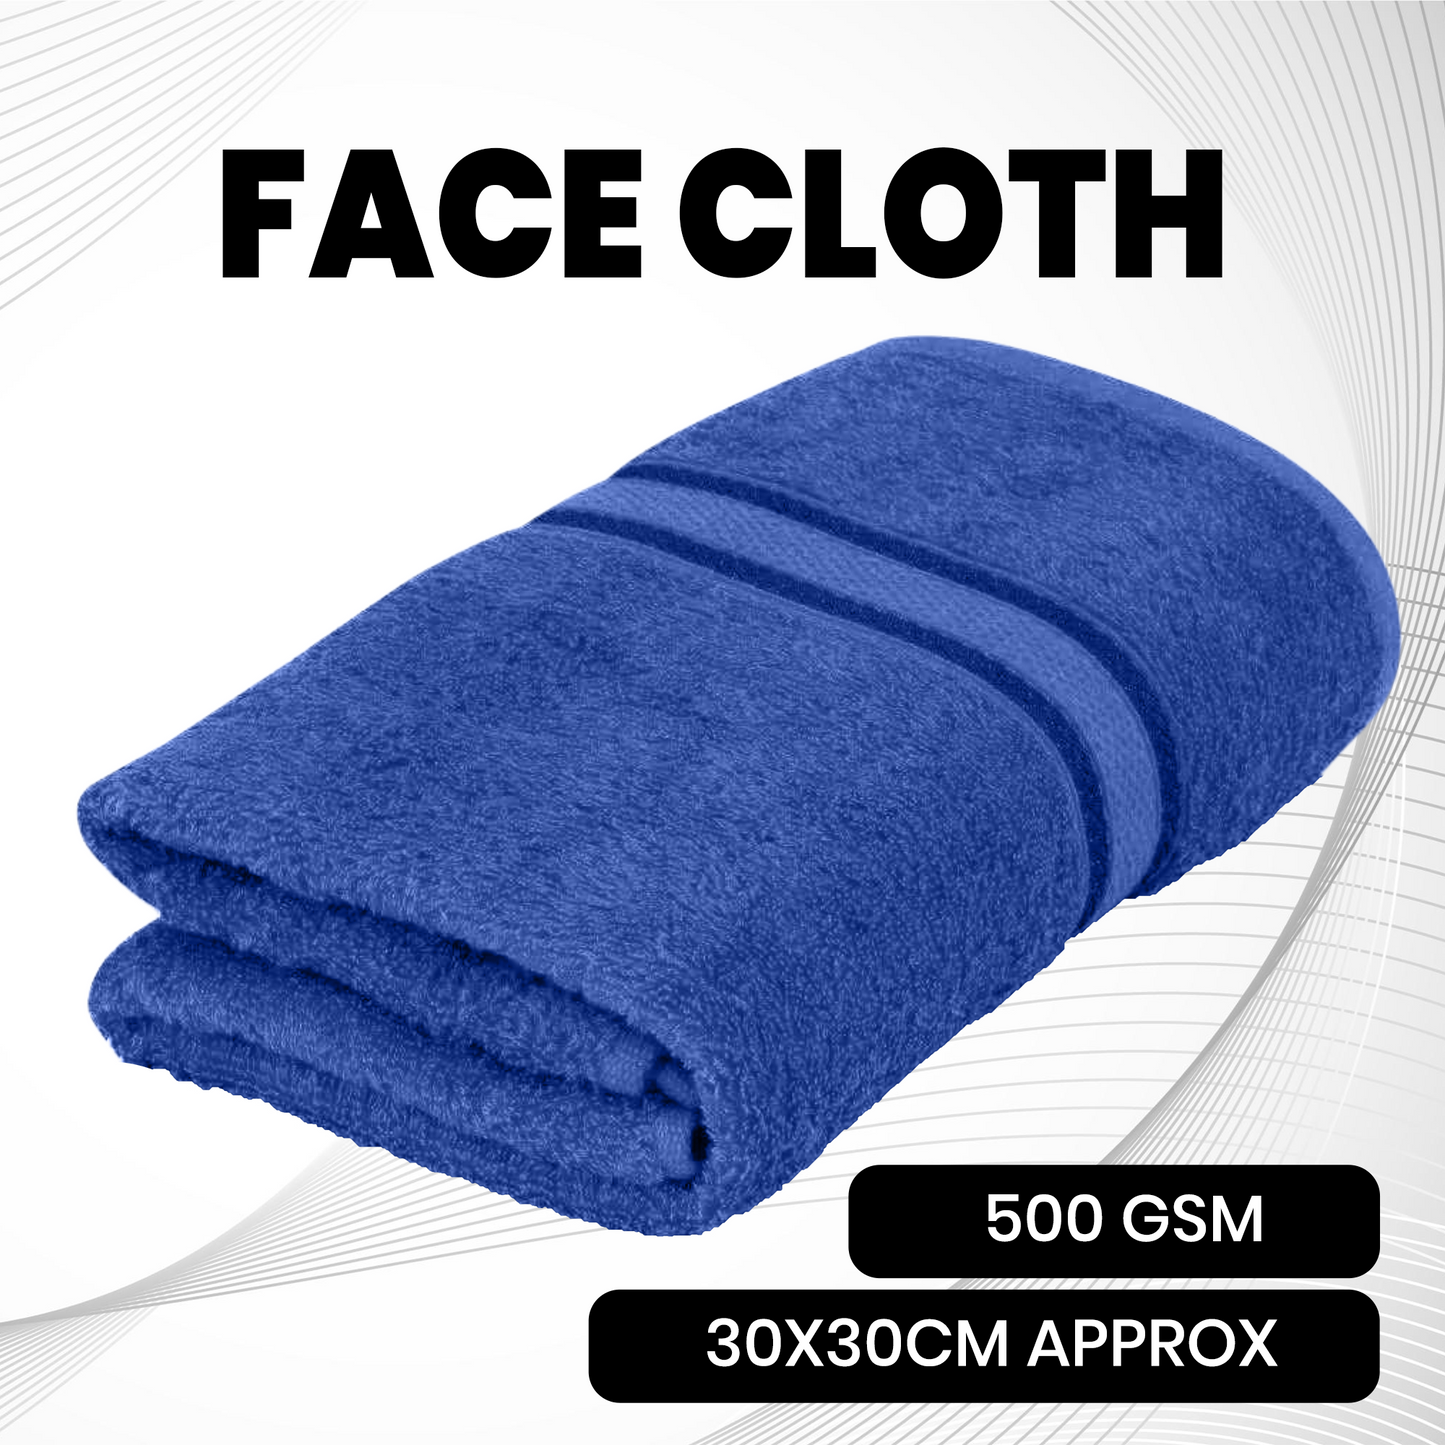 Flannel Face Towels pack Luxury Flannels 100% Royal Egyptian Cotton Face Cloths UK ⭐⭐⭐⭐⭐